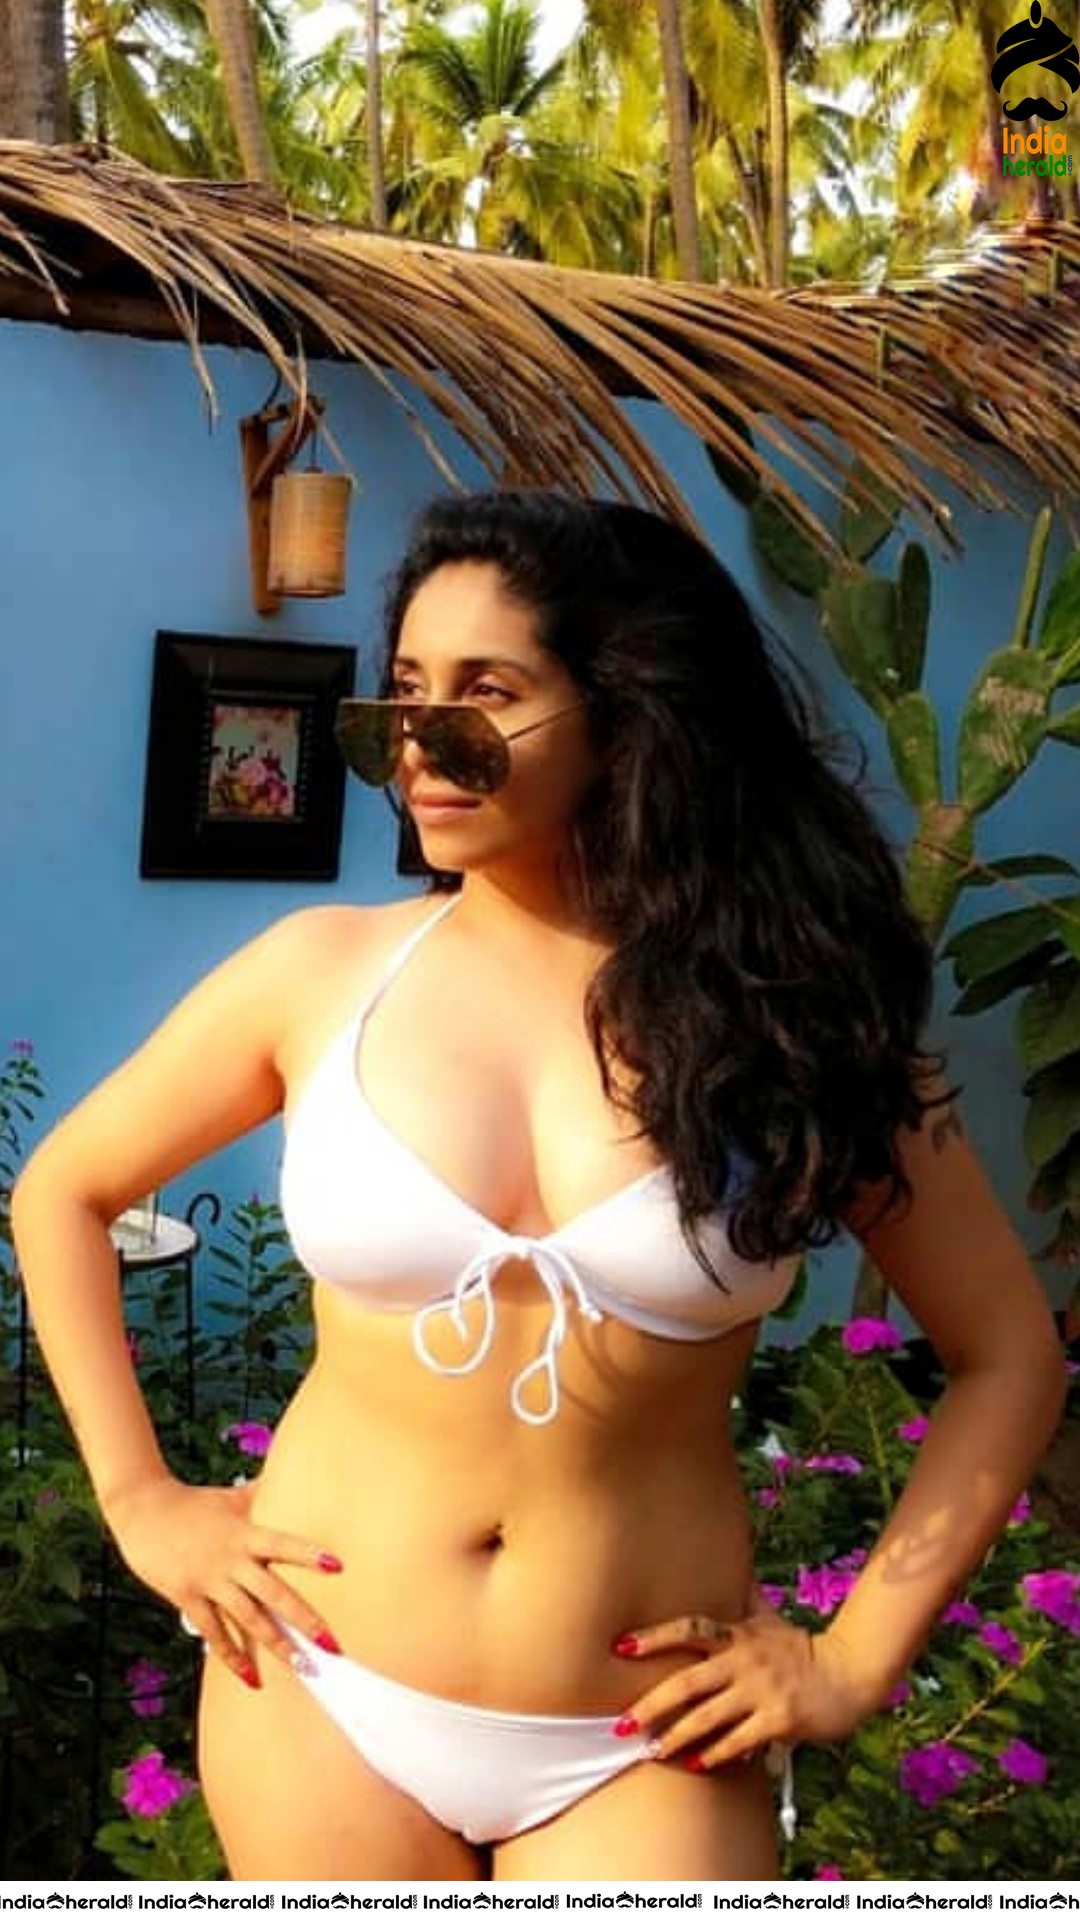 Singer Neha Bhasin Hot Photos Collection to tempt your mood Set 2